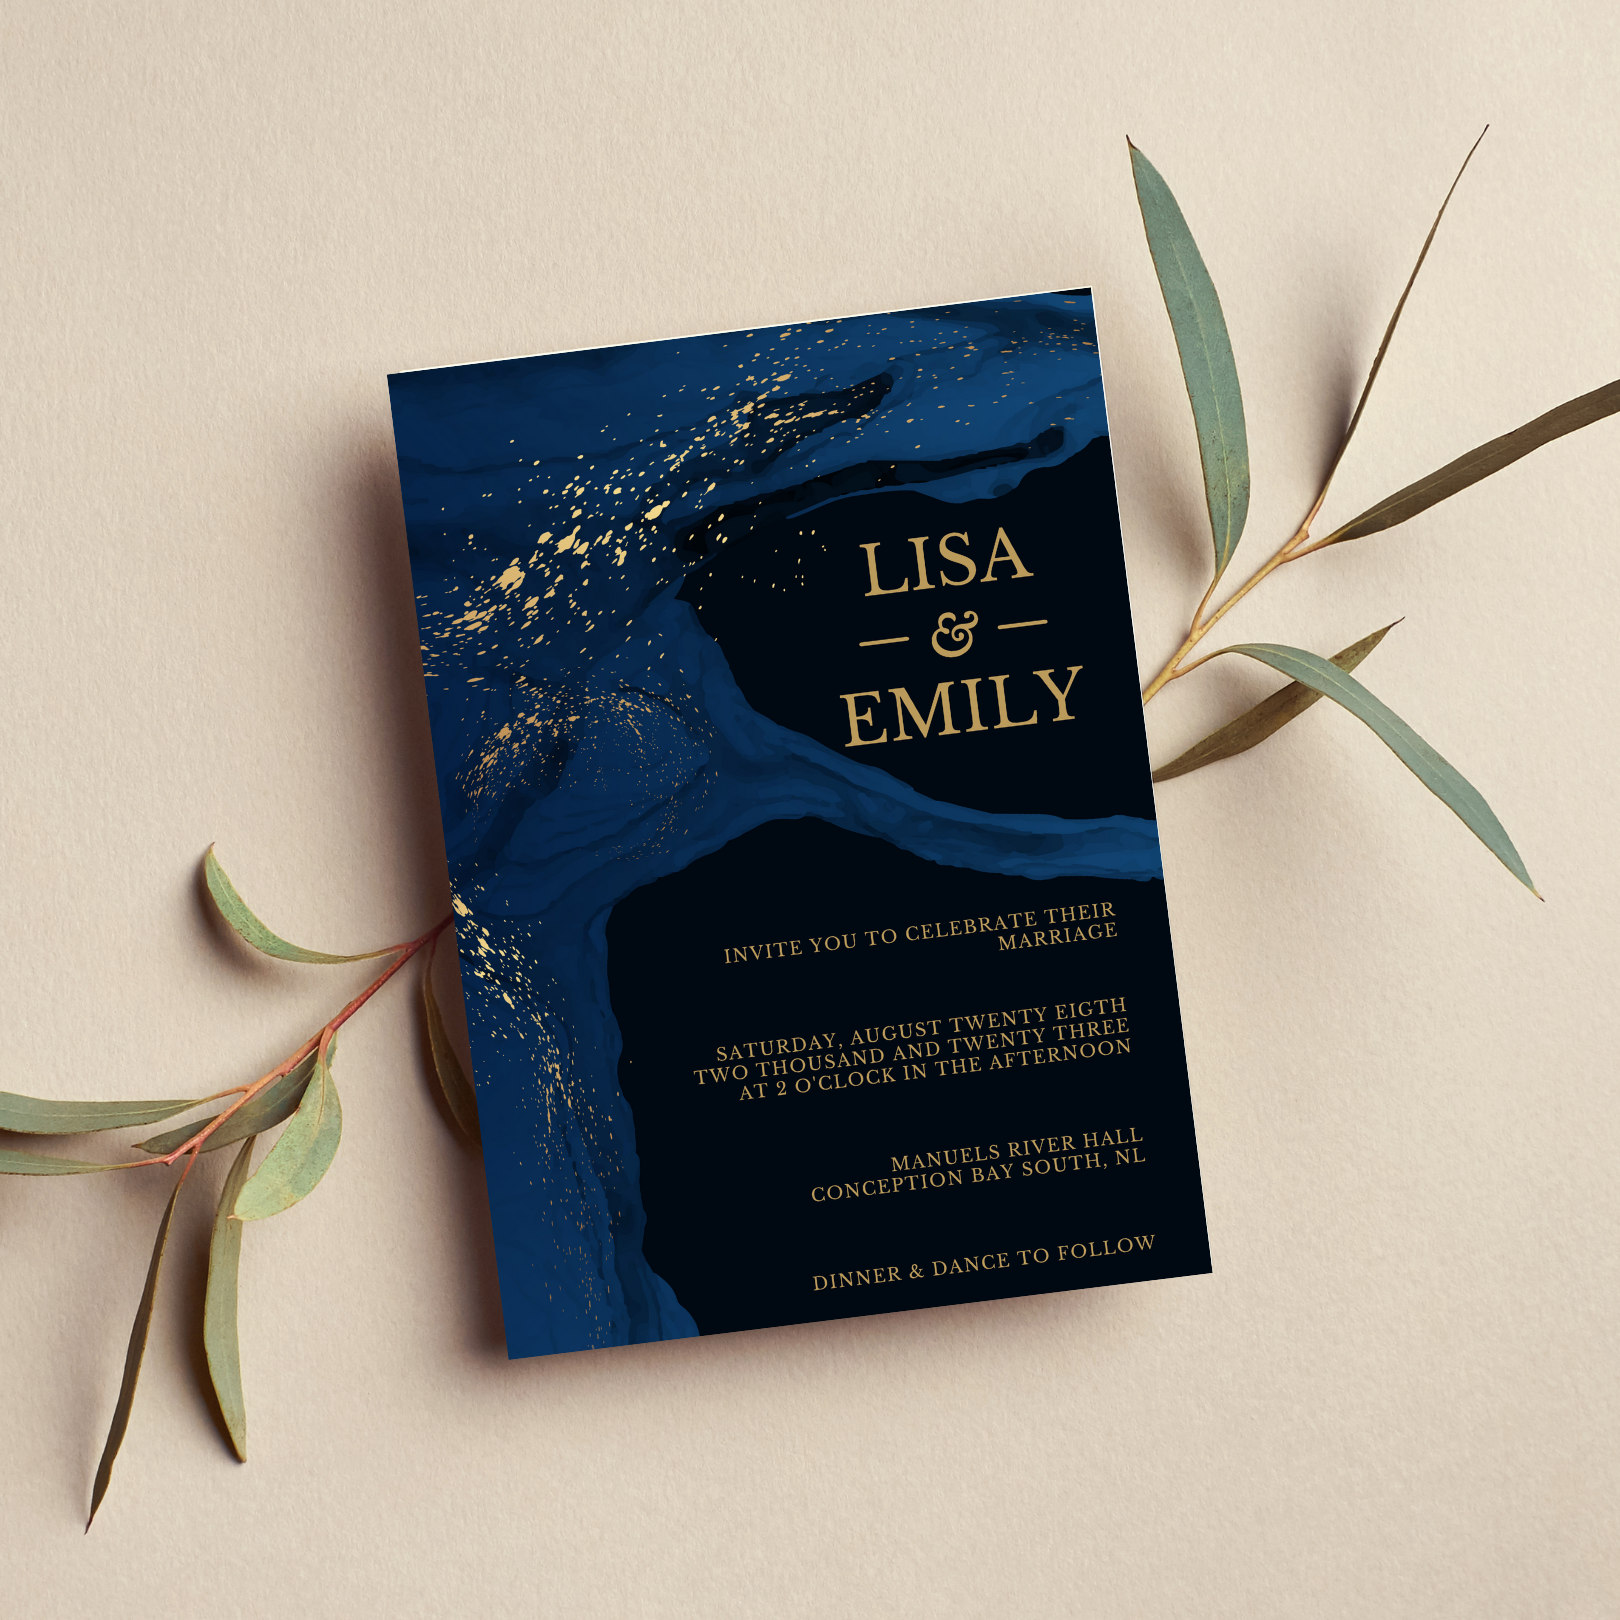 A black, blue and gold wedding invitation sits on top of a cream-coloured background. Underneath the invitation are small branches with thin leaves.